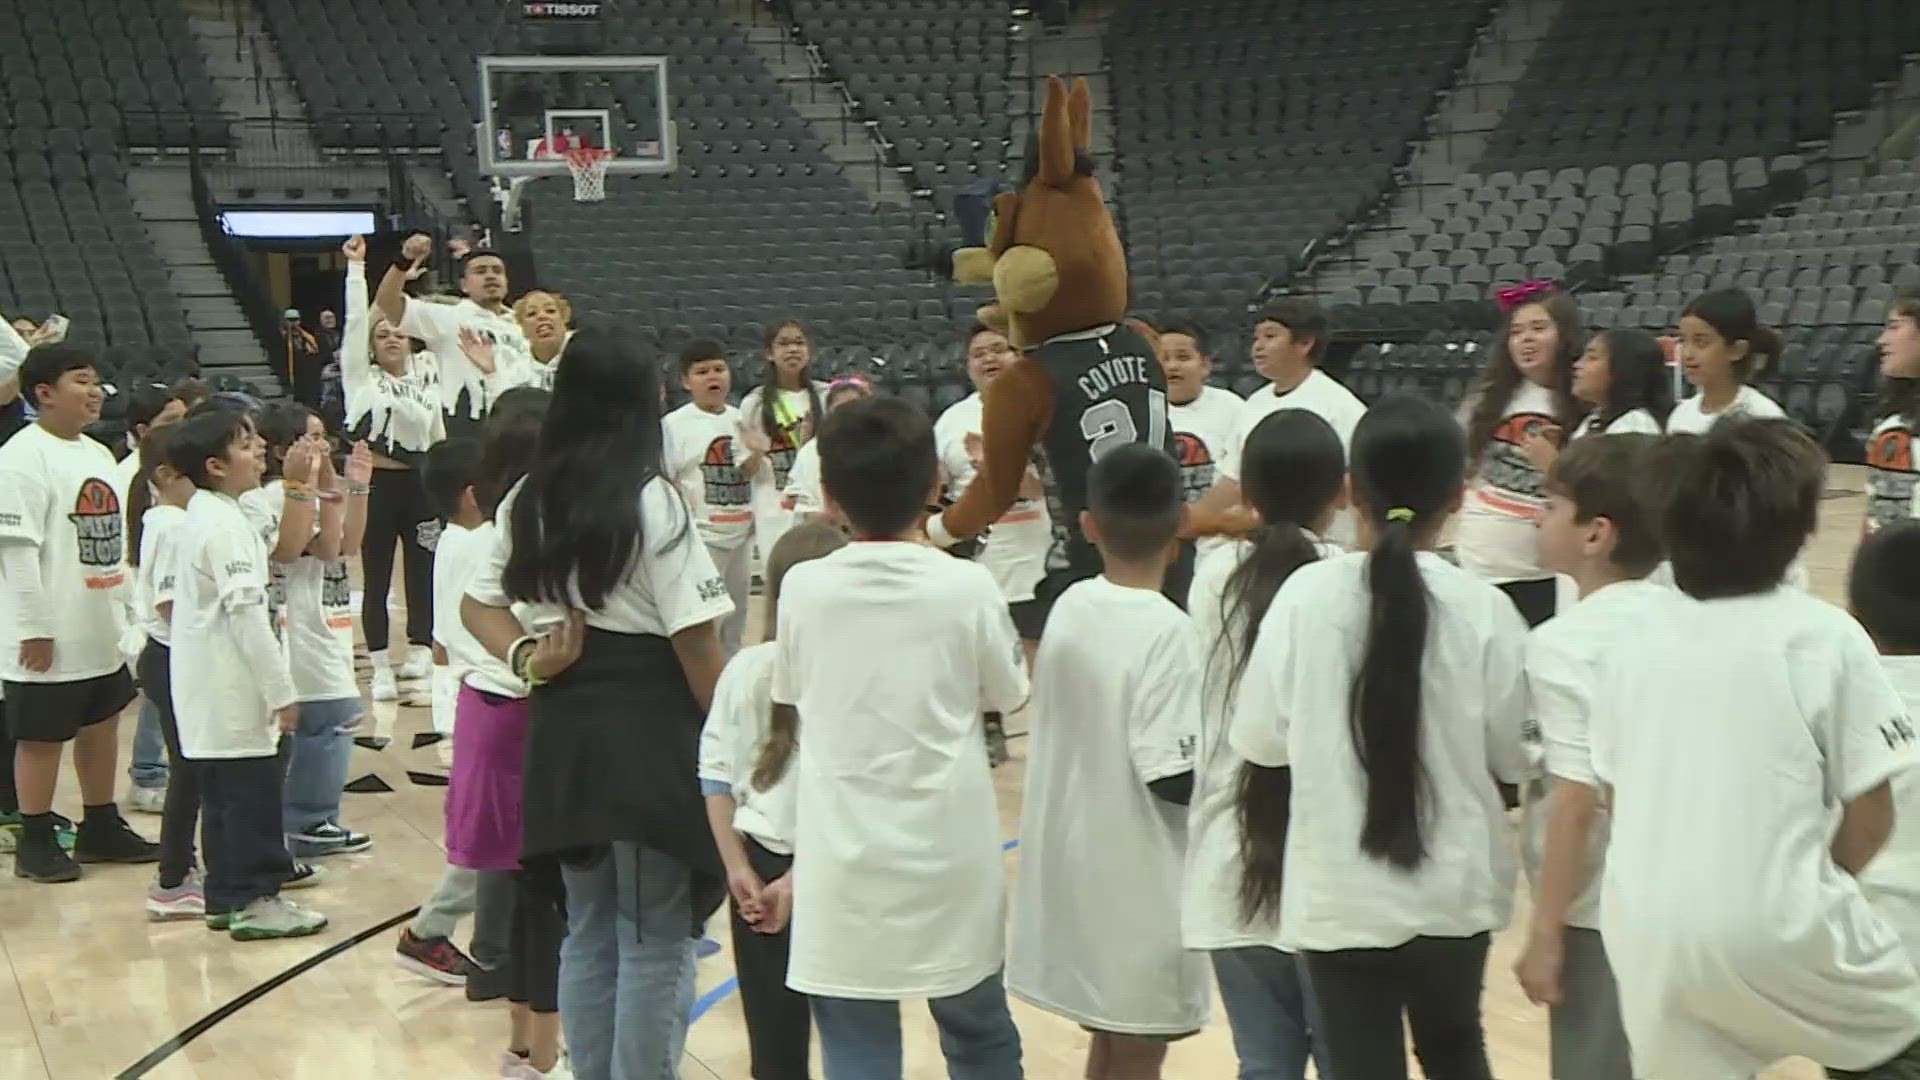 The program aims to teach students math skills through the game of basketball.